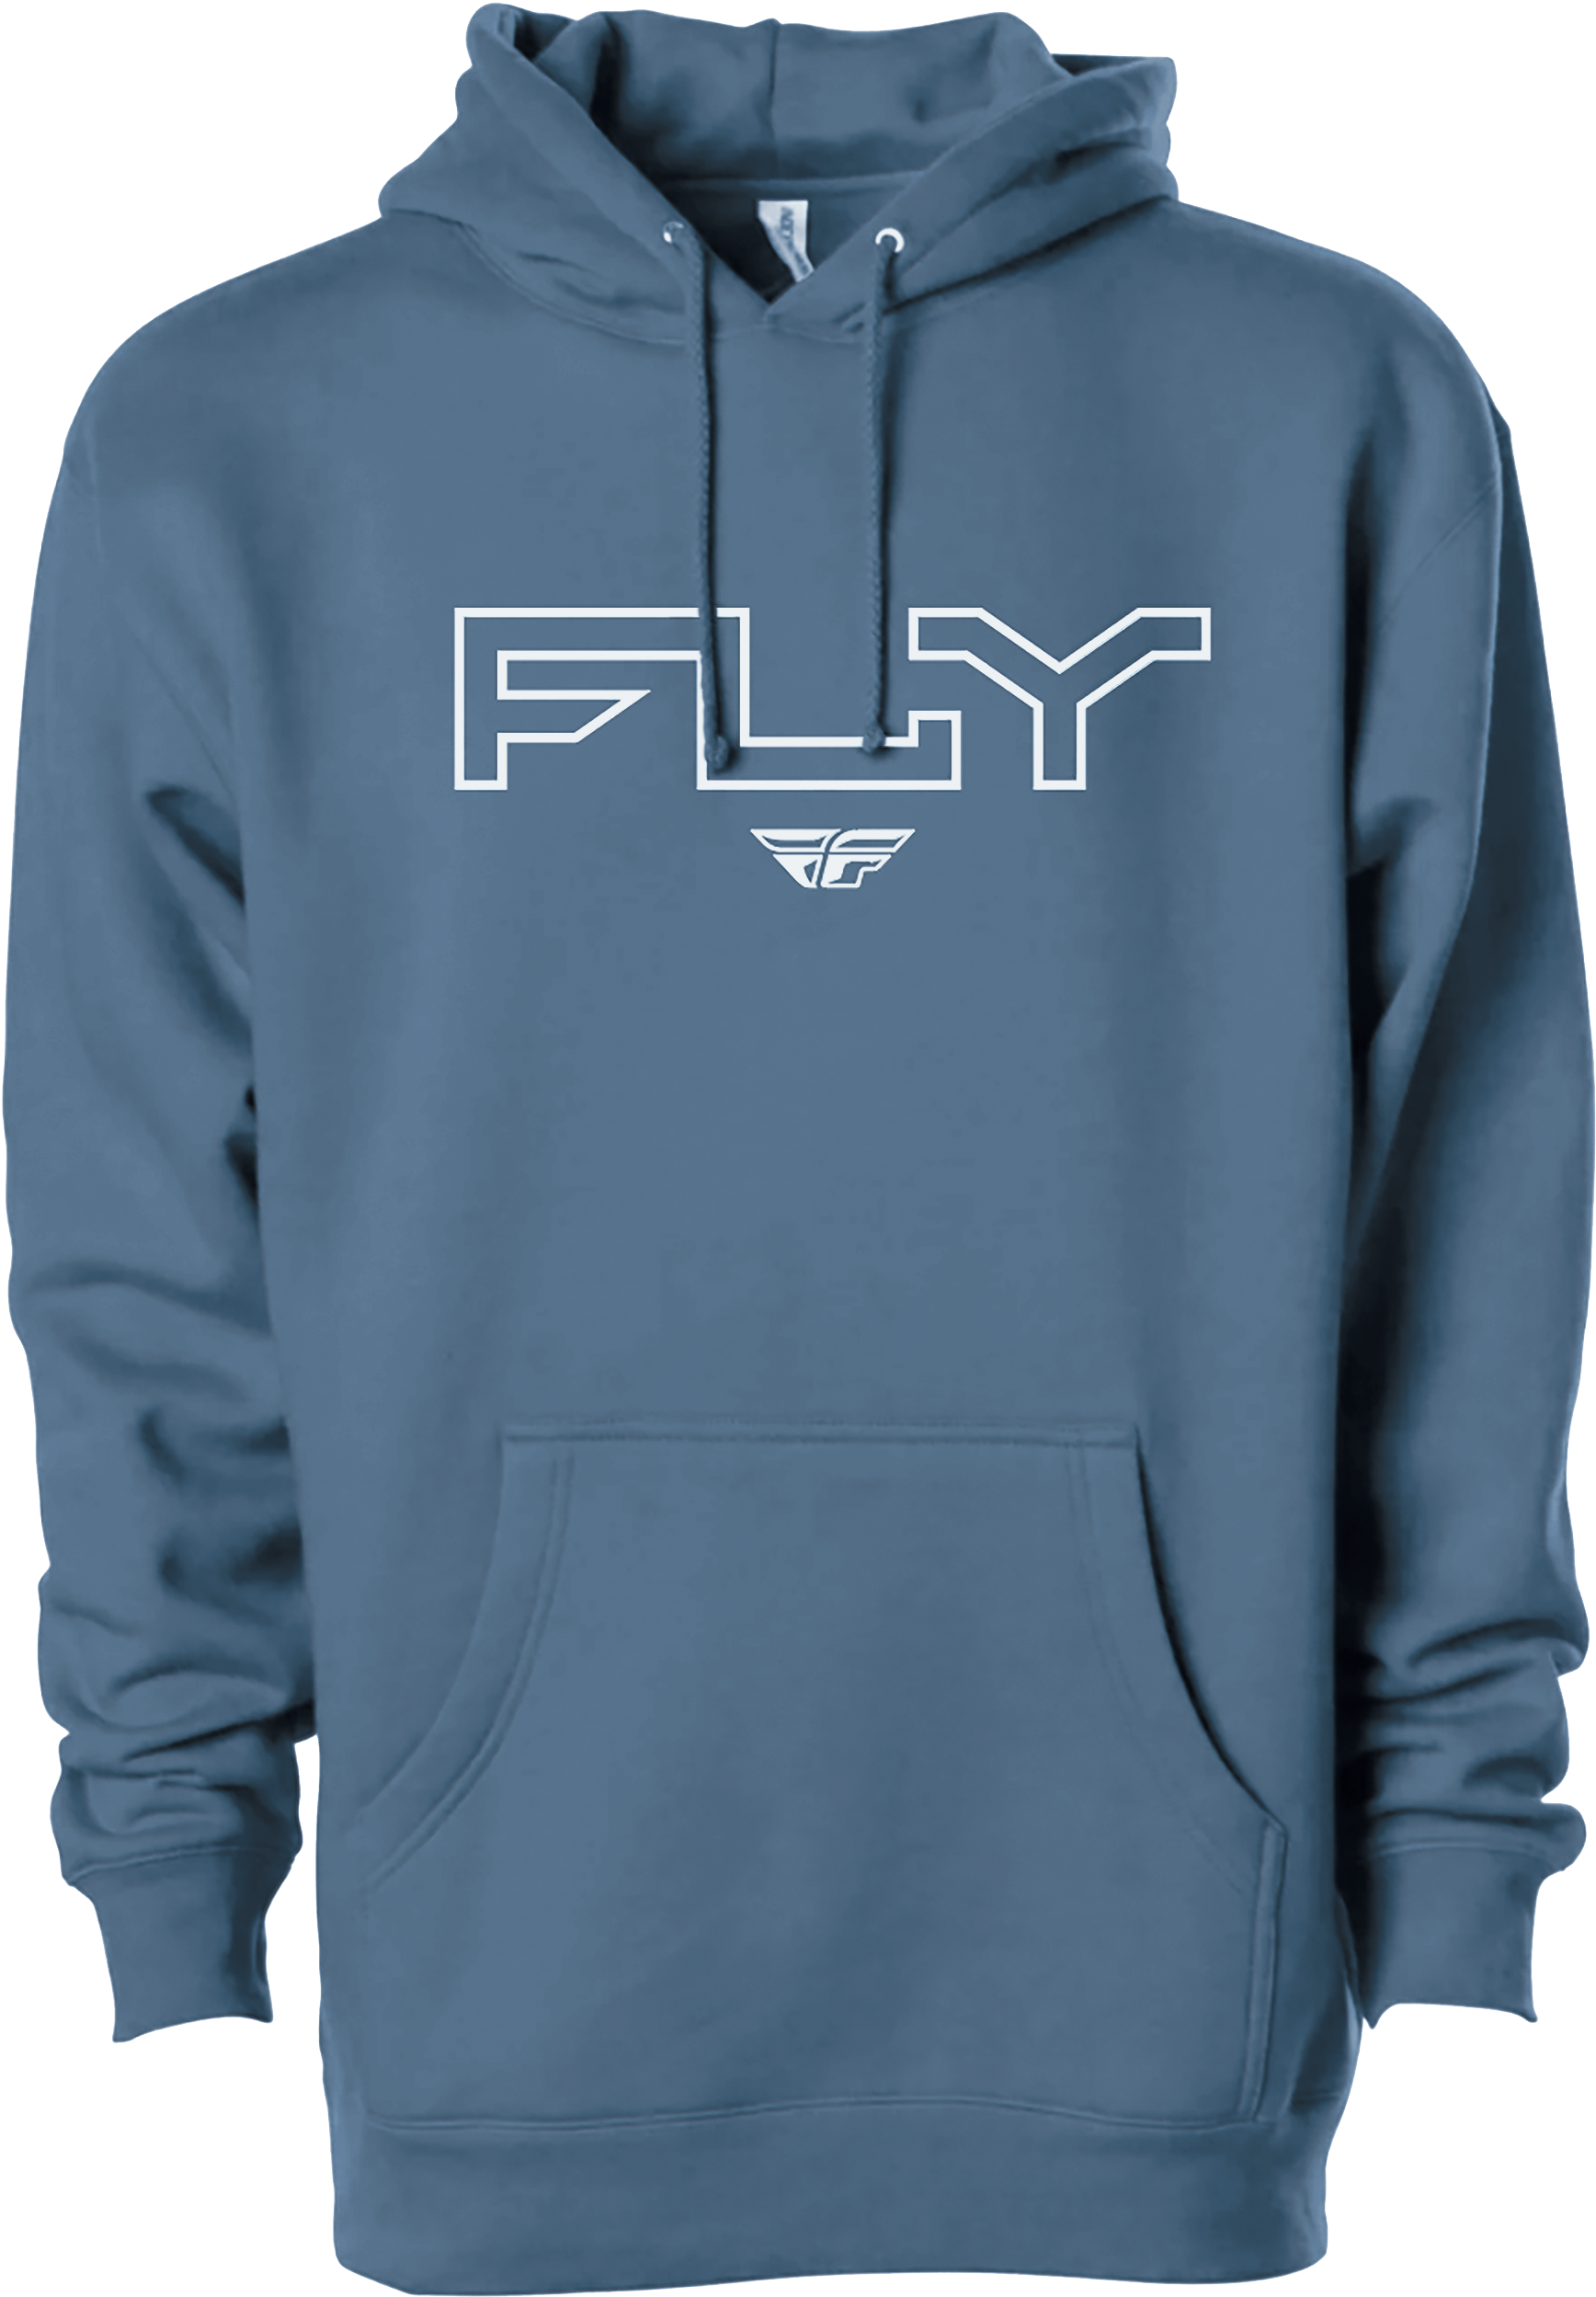 Youth Fly Edge Hoodie Storm Blue Yl/Yx